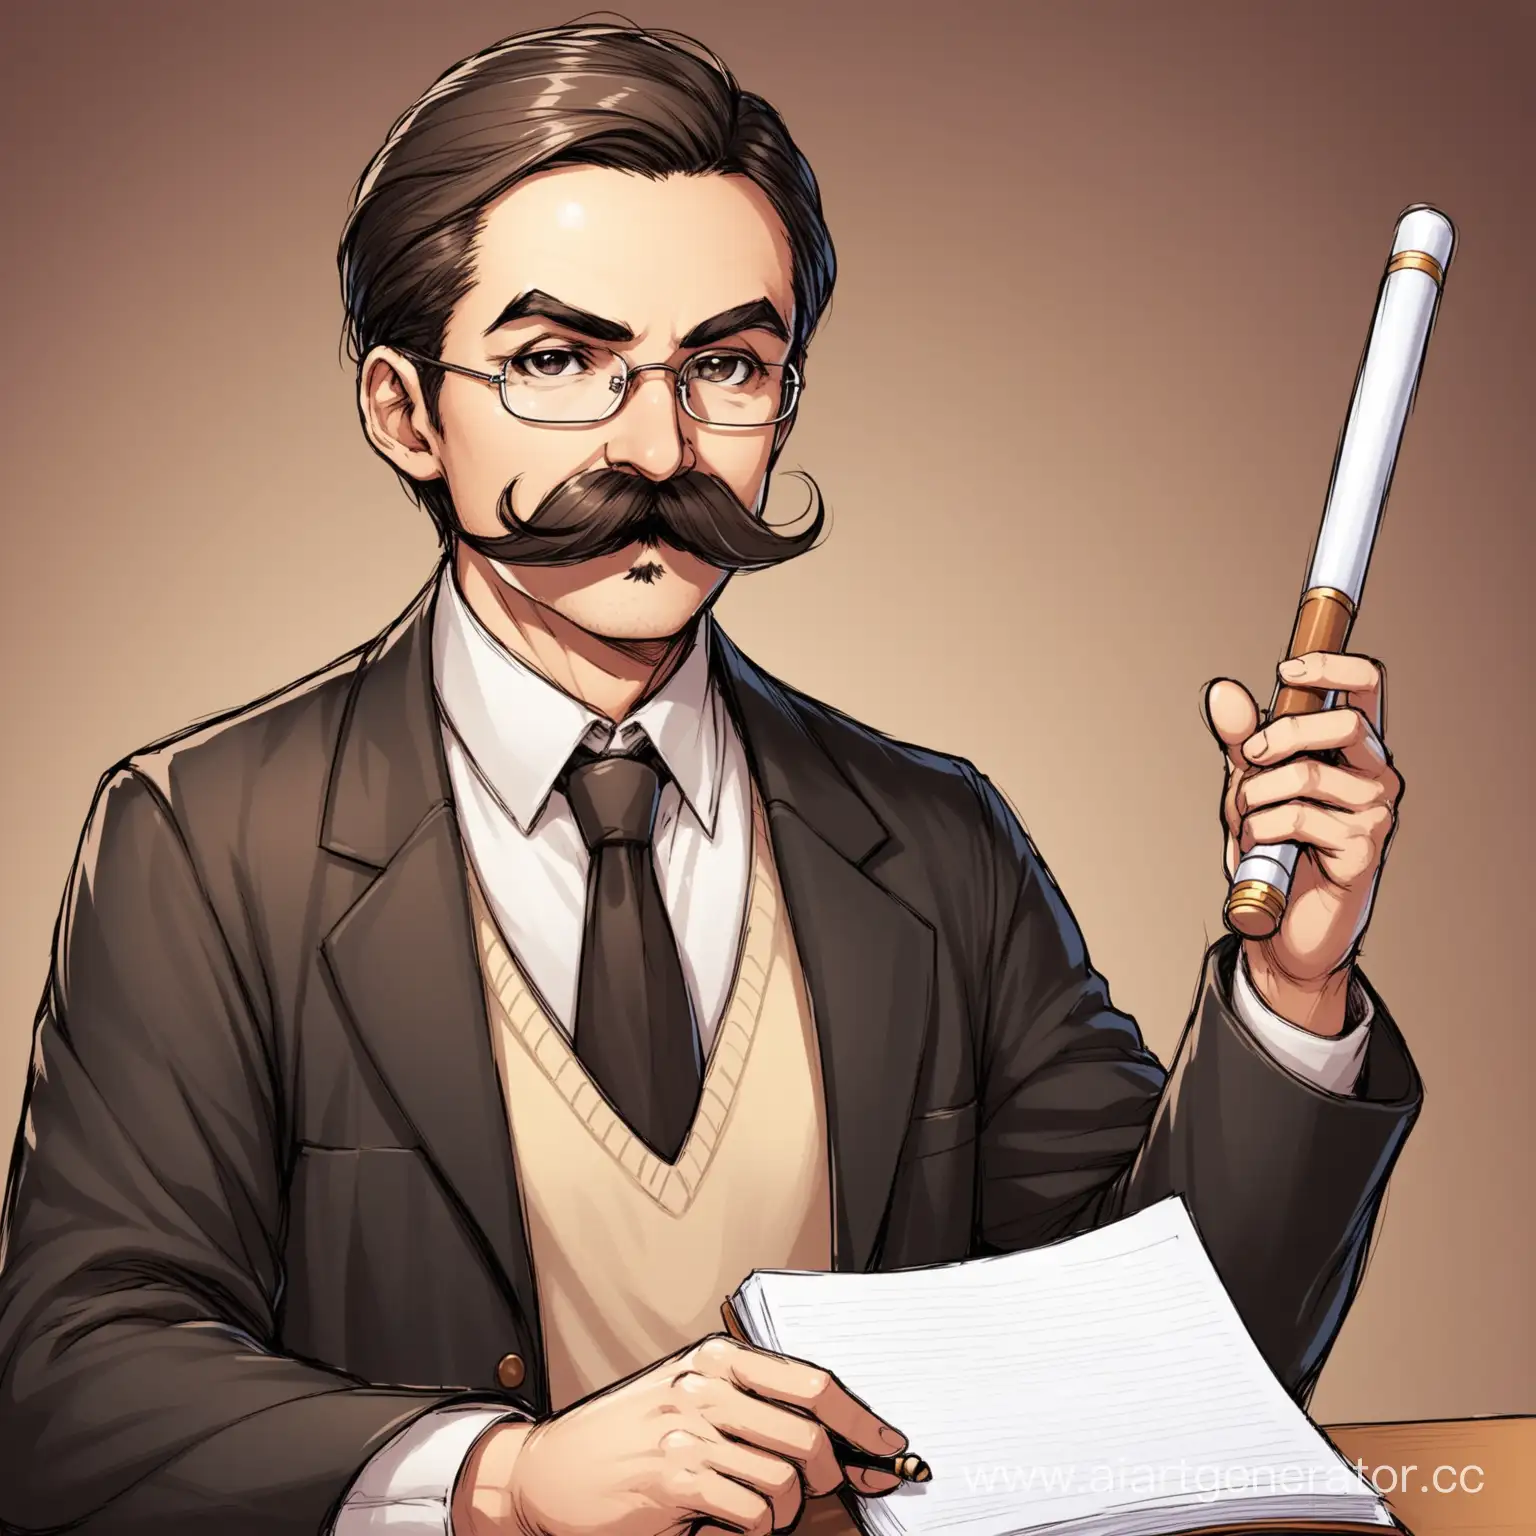 Student-Submits-Report-to-Professor-with-Mustachioed-Baton